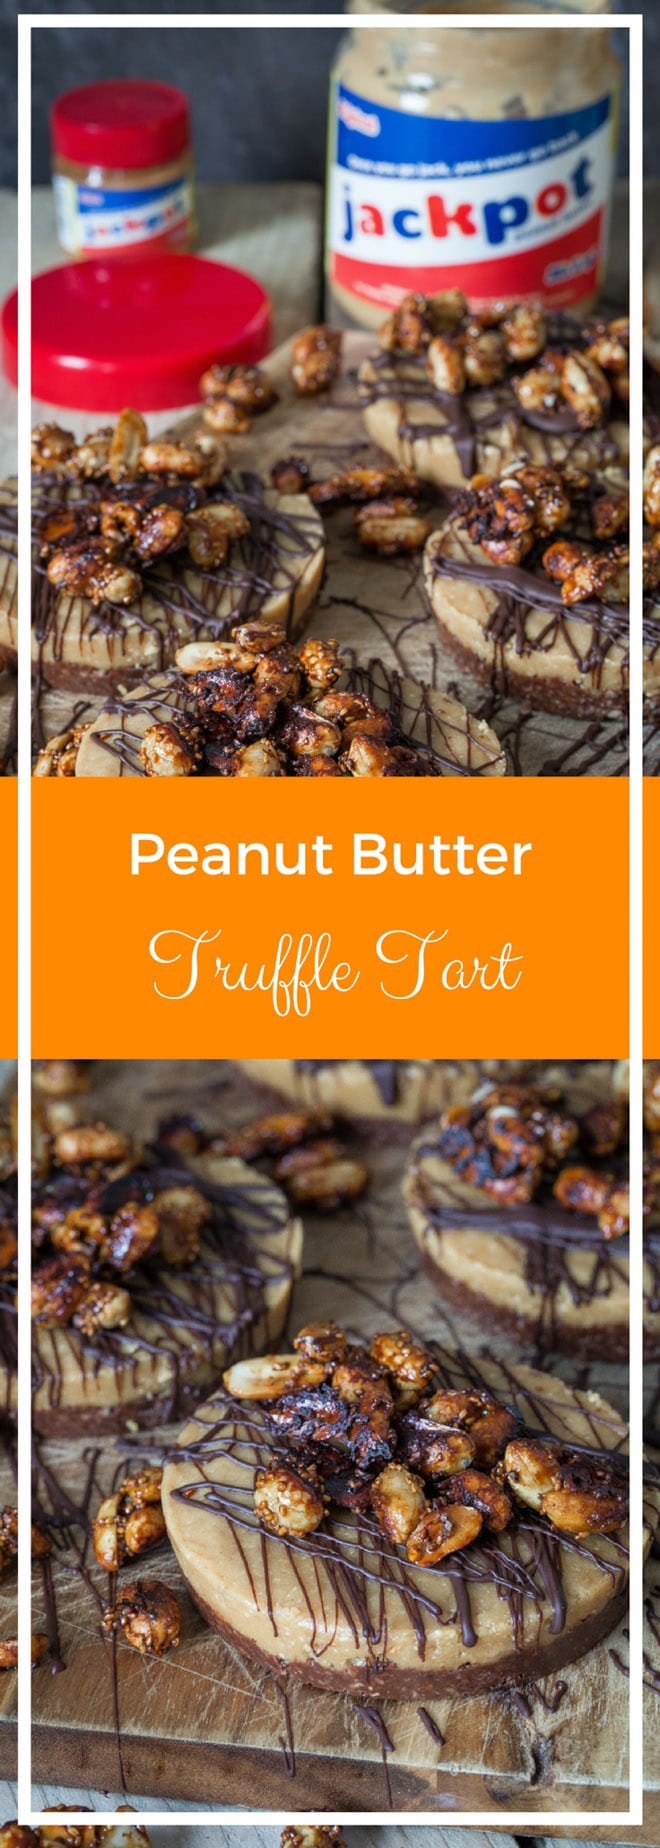 Peanut Butter Truffle Tart - chocolate, dates and peanut butter make these healthy little tarts decadently rich and moreish | thecookandhim.com